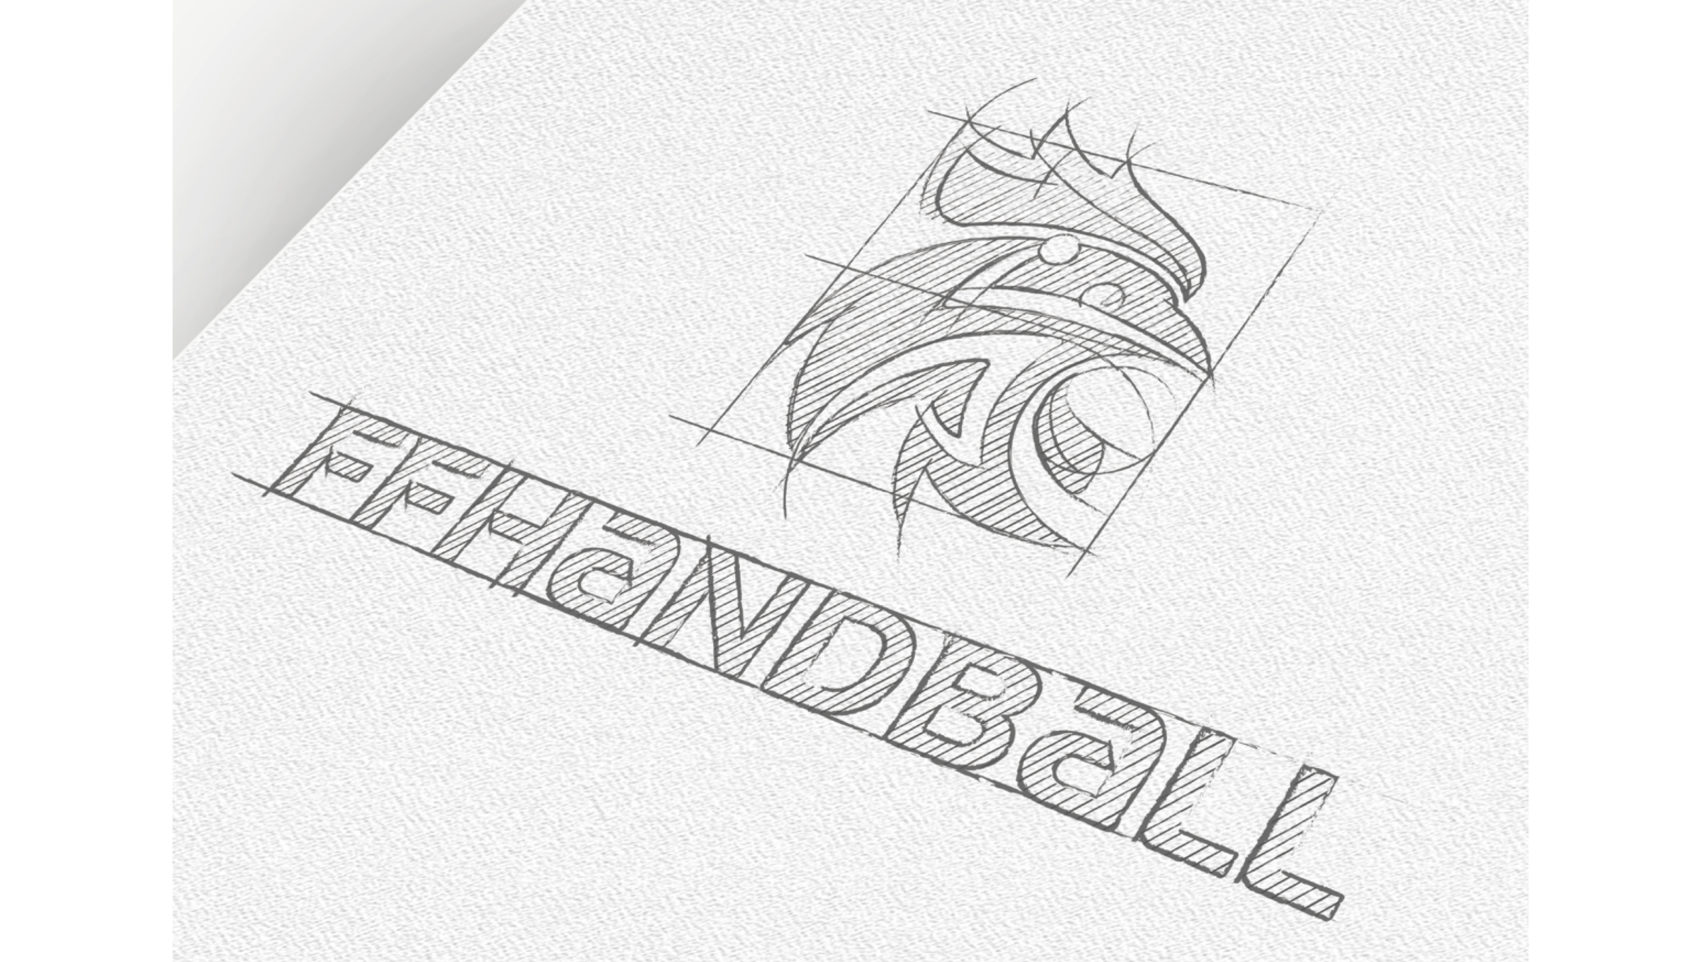 projet_project_realisation_02_Federation_Francaise_french_Handball